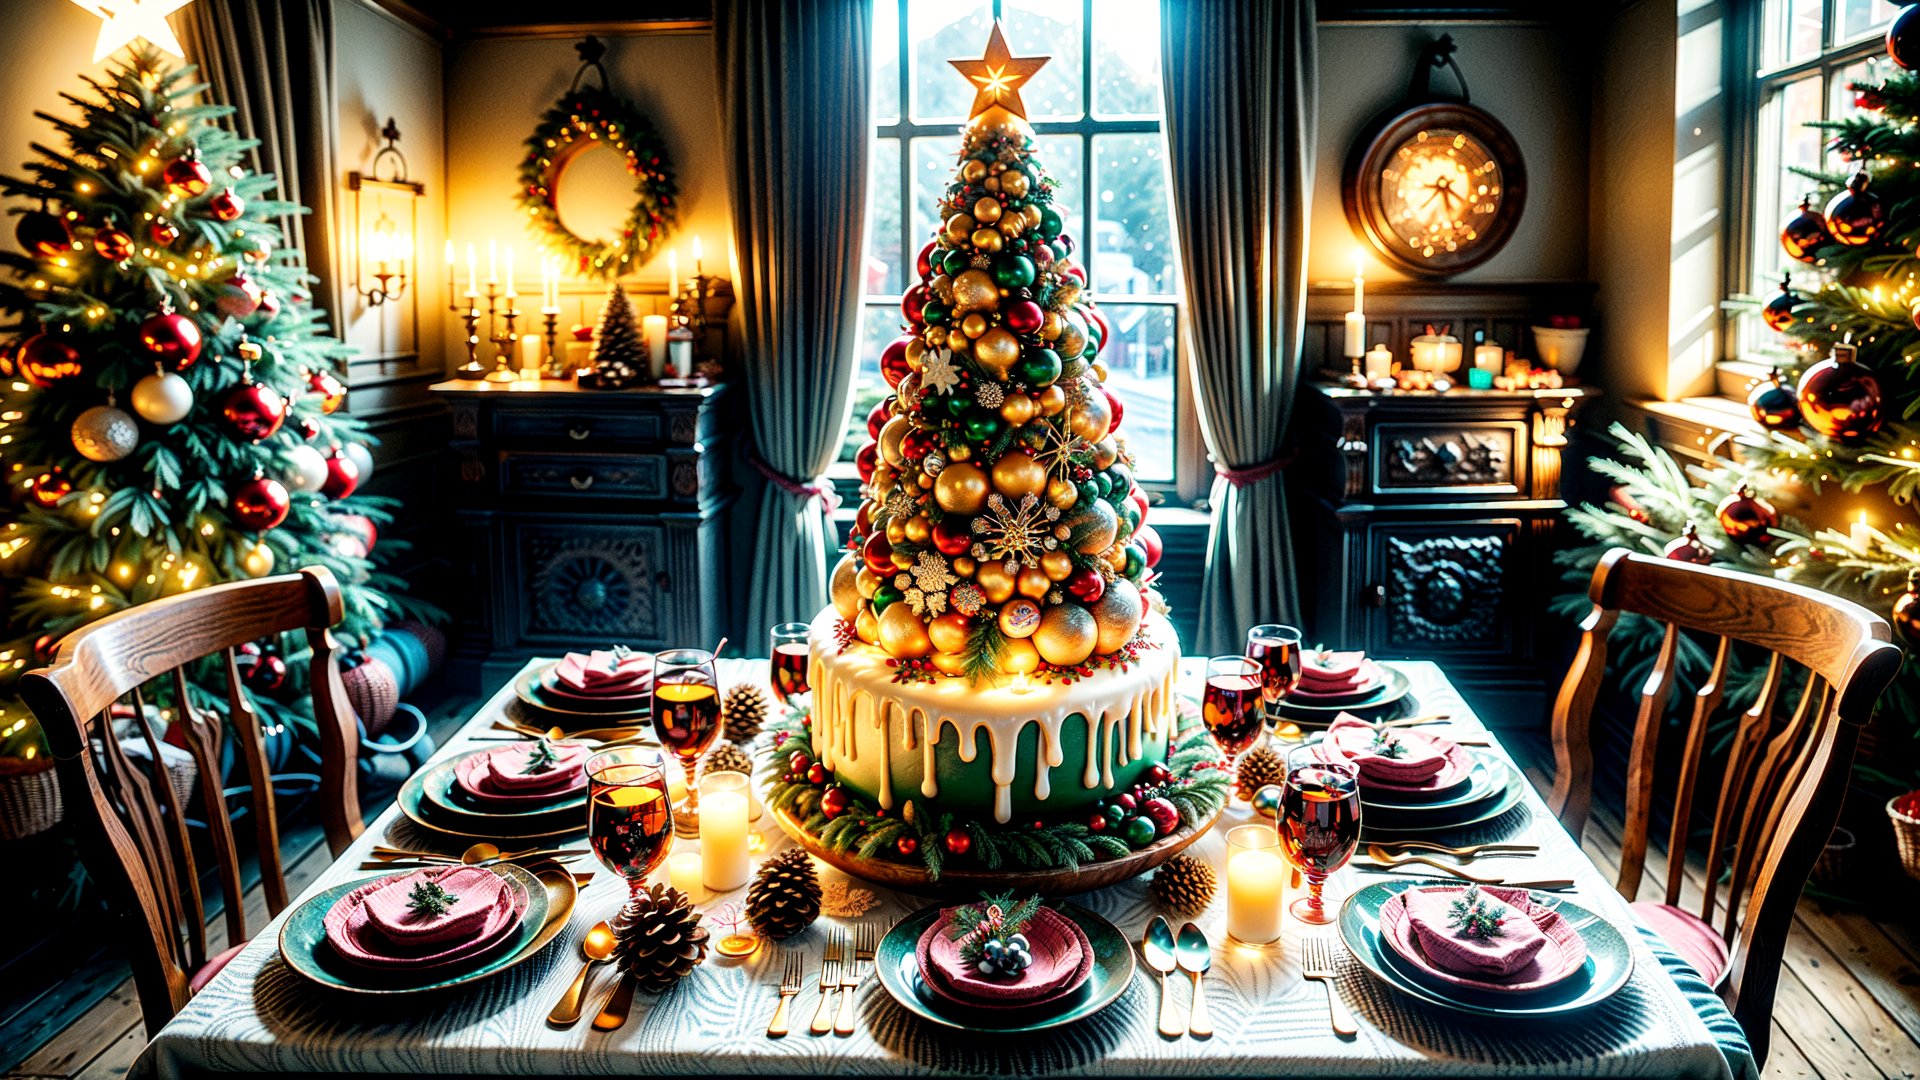 Christmas-themed room, The room is adorned with holiday decorations, creating a warm and inviting atmosphere. The dining table is the centerpiece, covered with a colorful tablecloth and laden with an array of Christmas foods, including a roast, various pies, and seasonal fruits. The highlight on the table is a large, artistically decorated Christmas tree-shaped cake. In the background, a beautifully decorated Christmas tree is illuminated with strings of lights, adding to the festive ambiance. Outside the window, the scene is enchanting with unique snowflake patterns gently falling, creating a picturesque winter wonderland. The overall scene encapsulates the joy and warmth of the Christmas season.